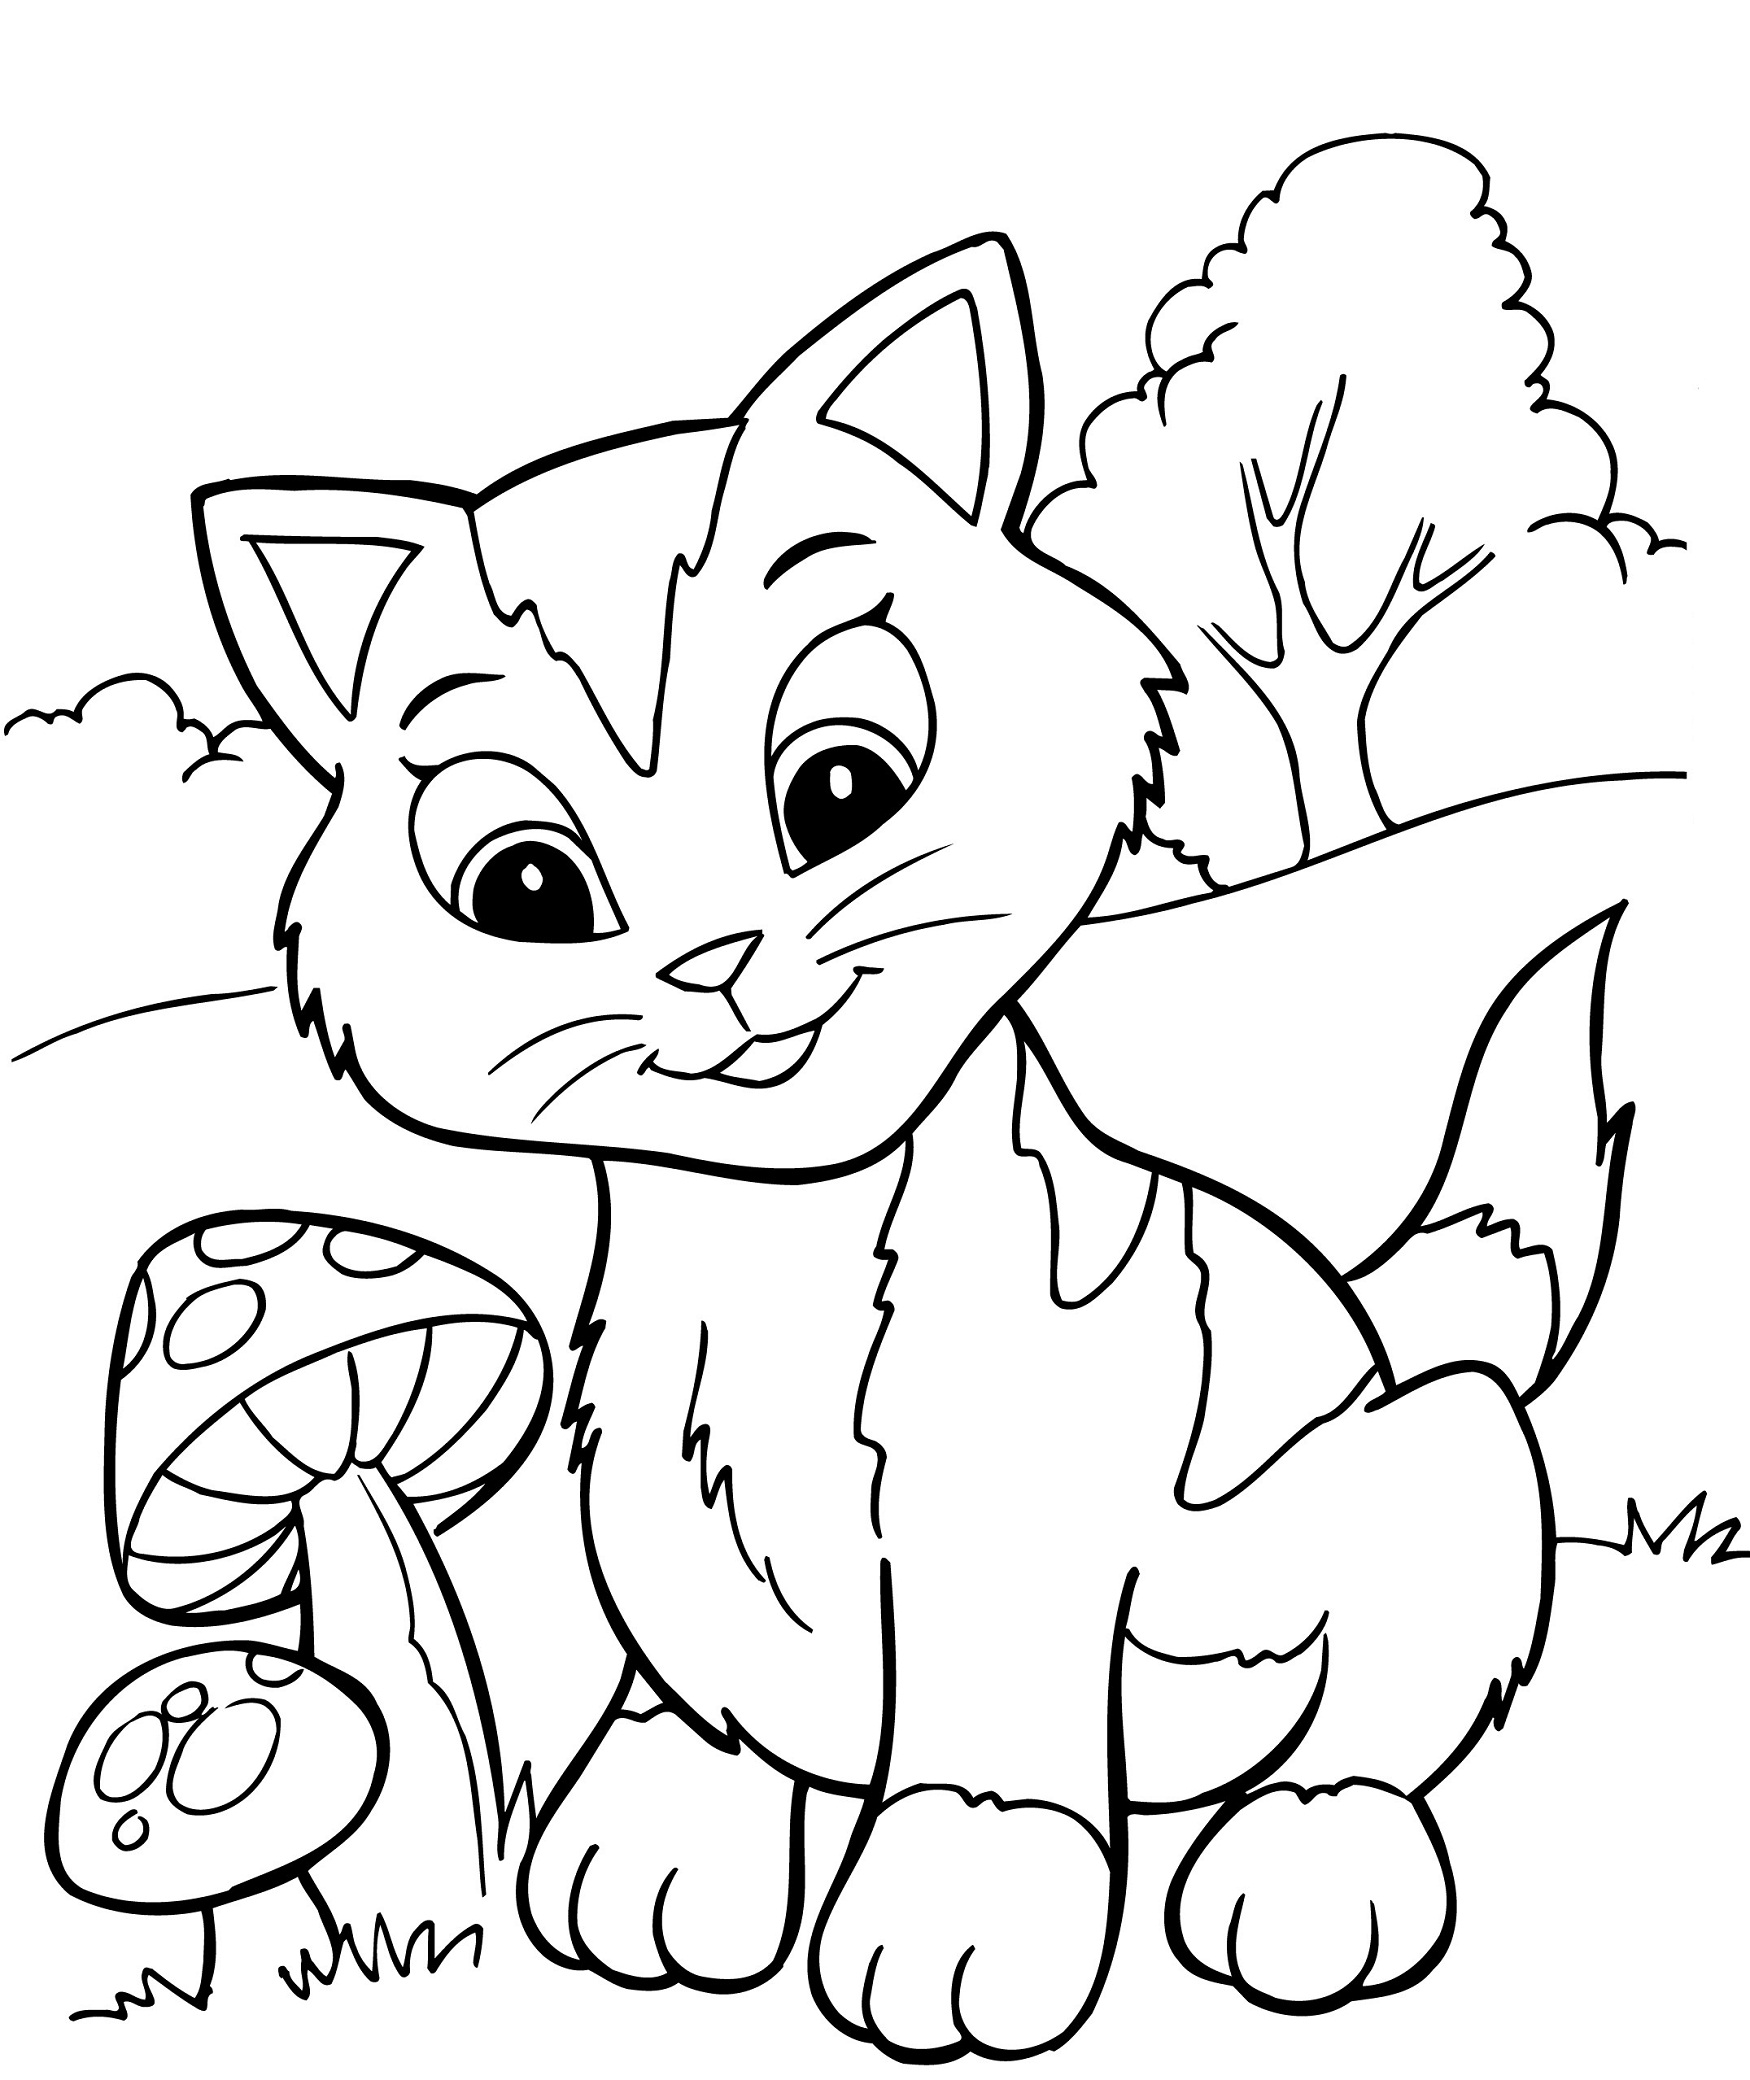 Preschool Kitten Coloring Pages - Coloring Home